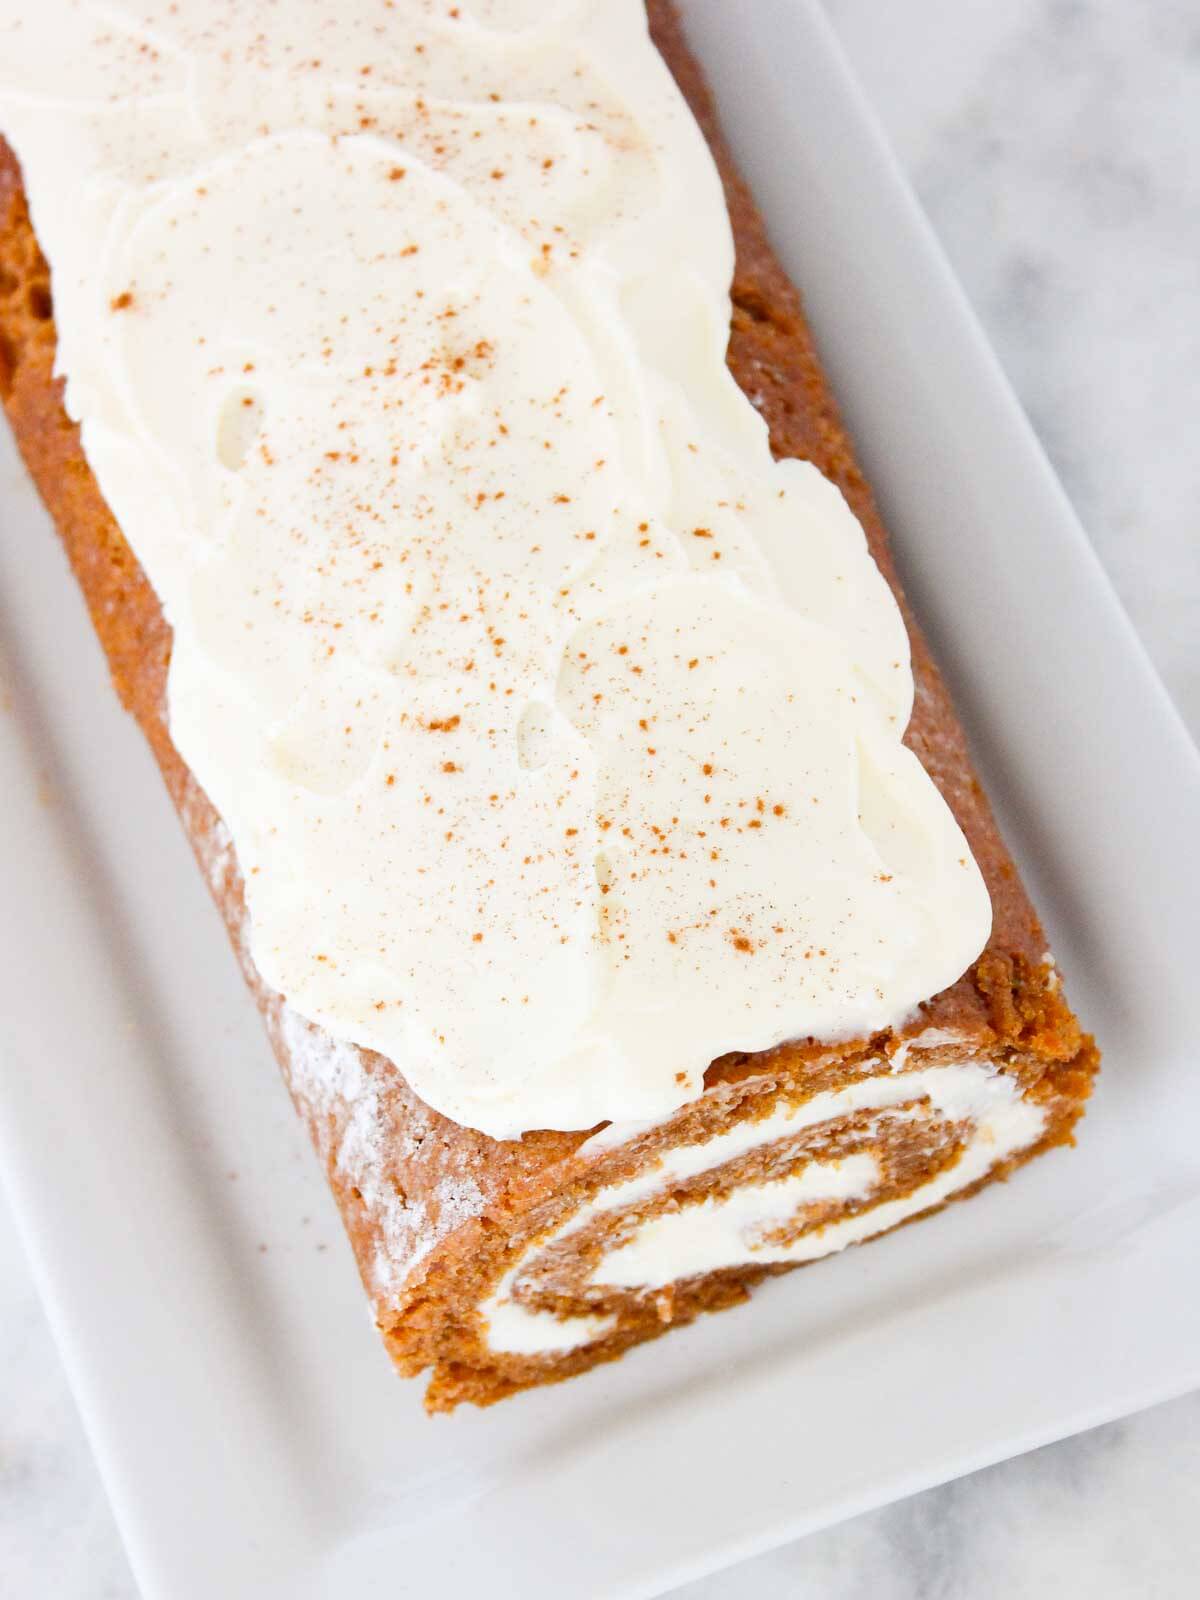 unsliced pumpkin roll with cream cheese frosting on top.